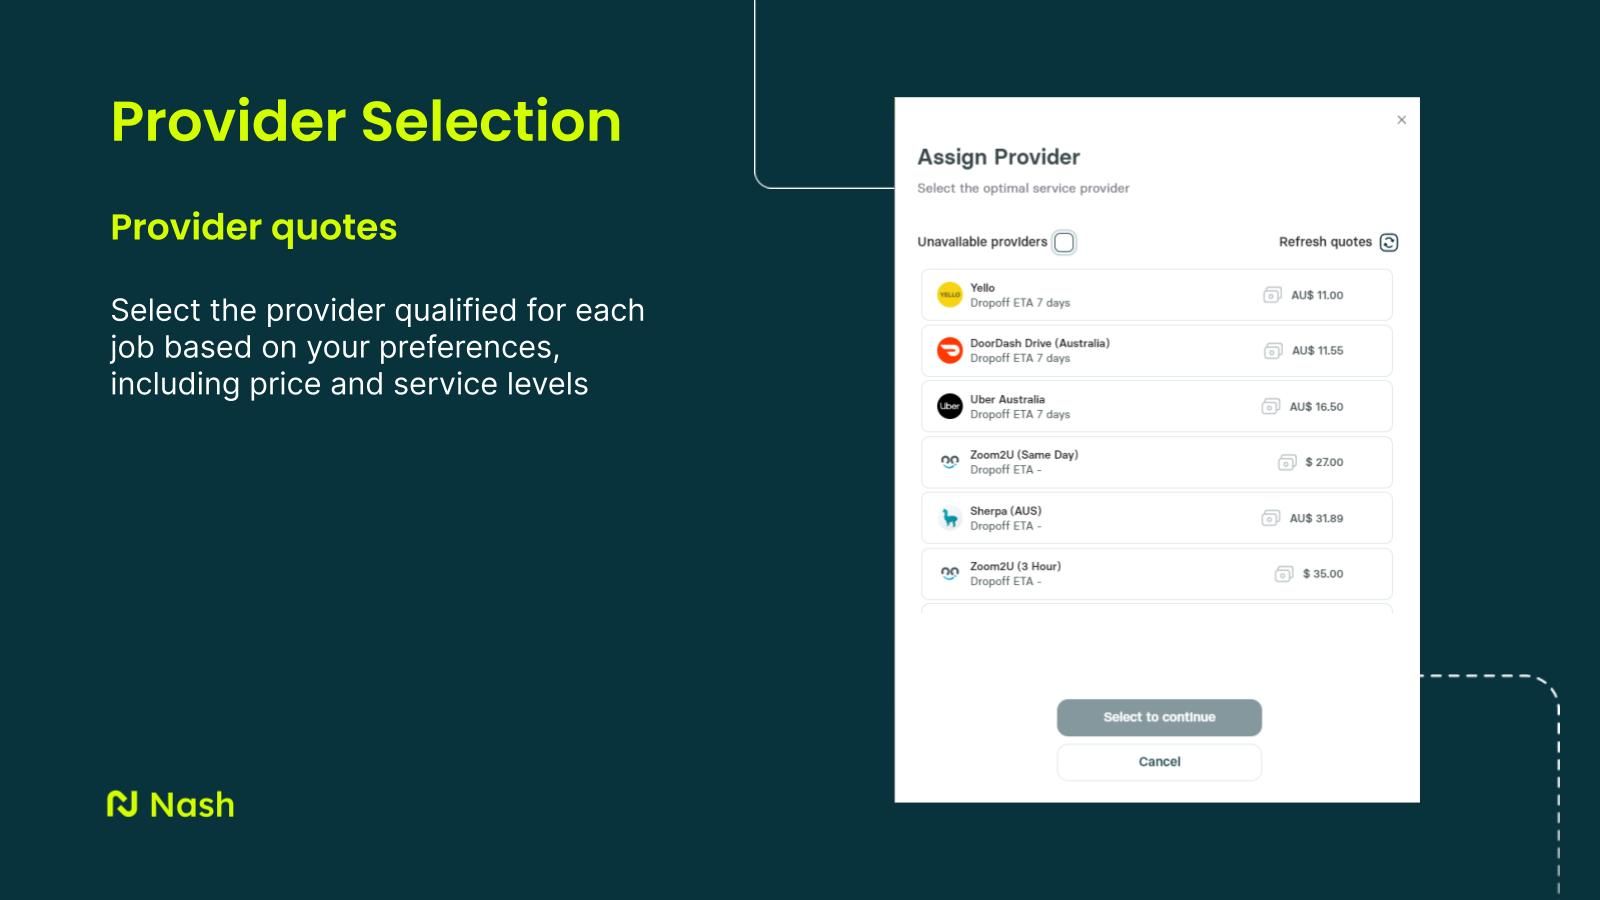 Provider Selection